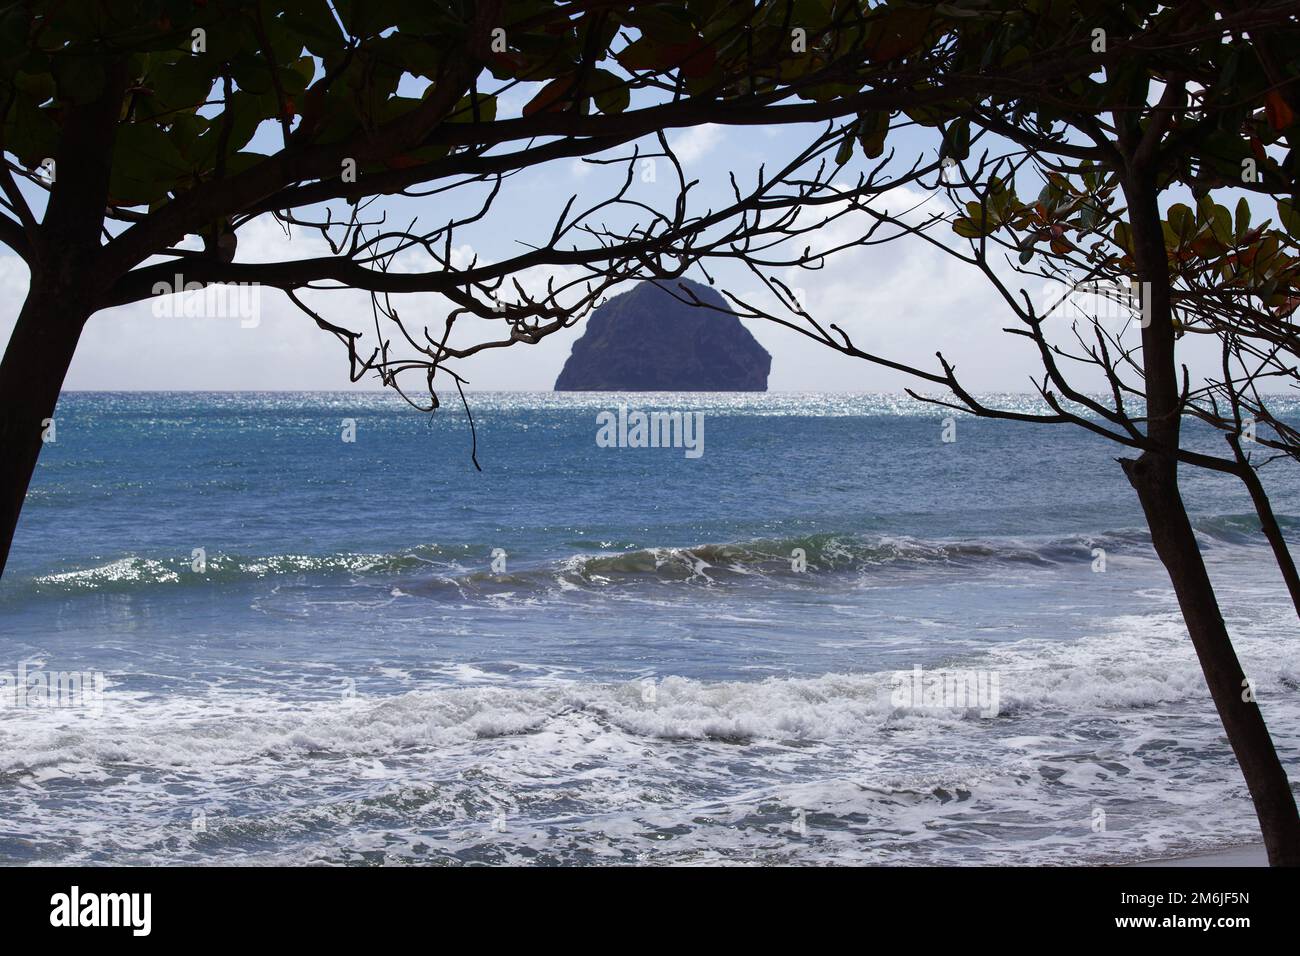 View of the Diamond rock in the caribbean ocean in Martinique. Stock Photo